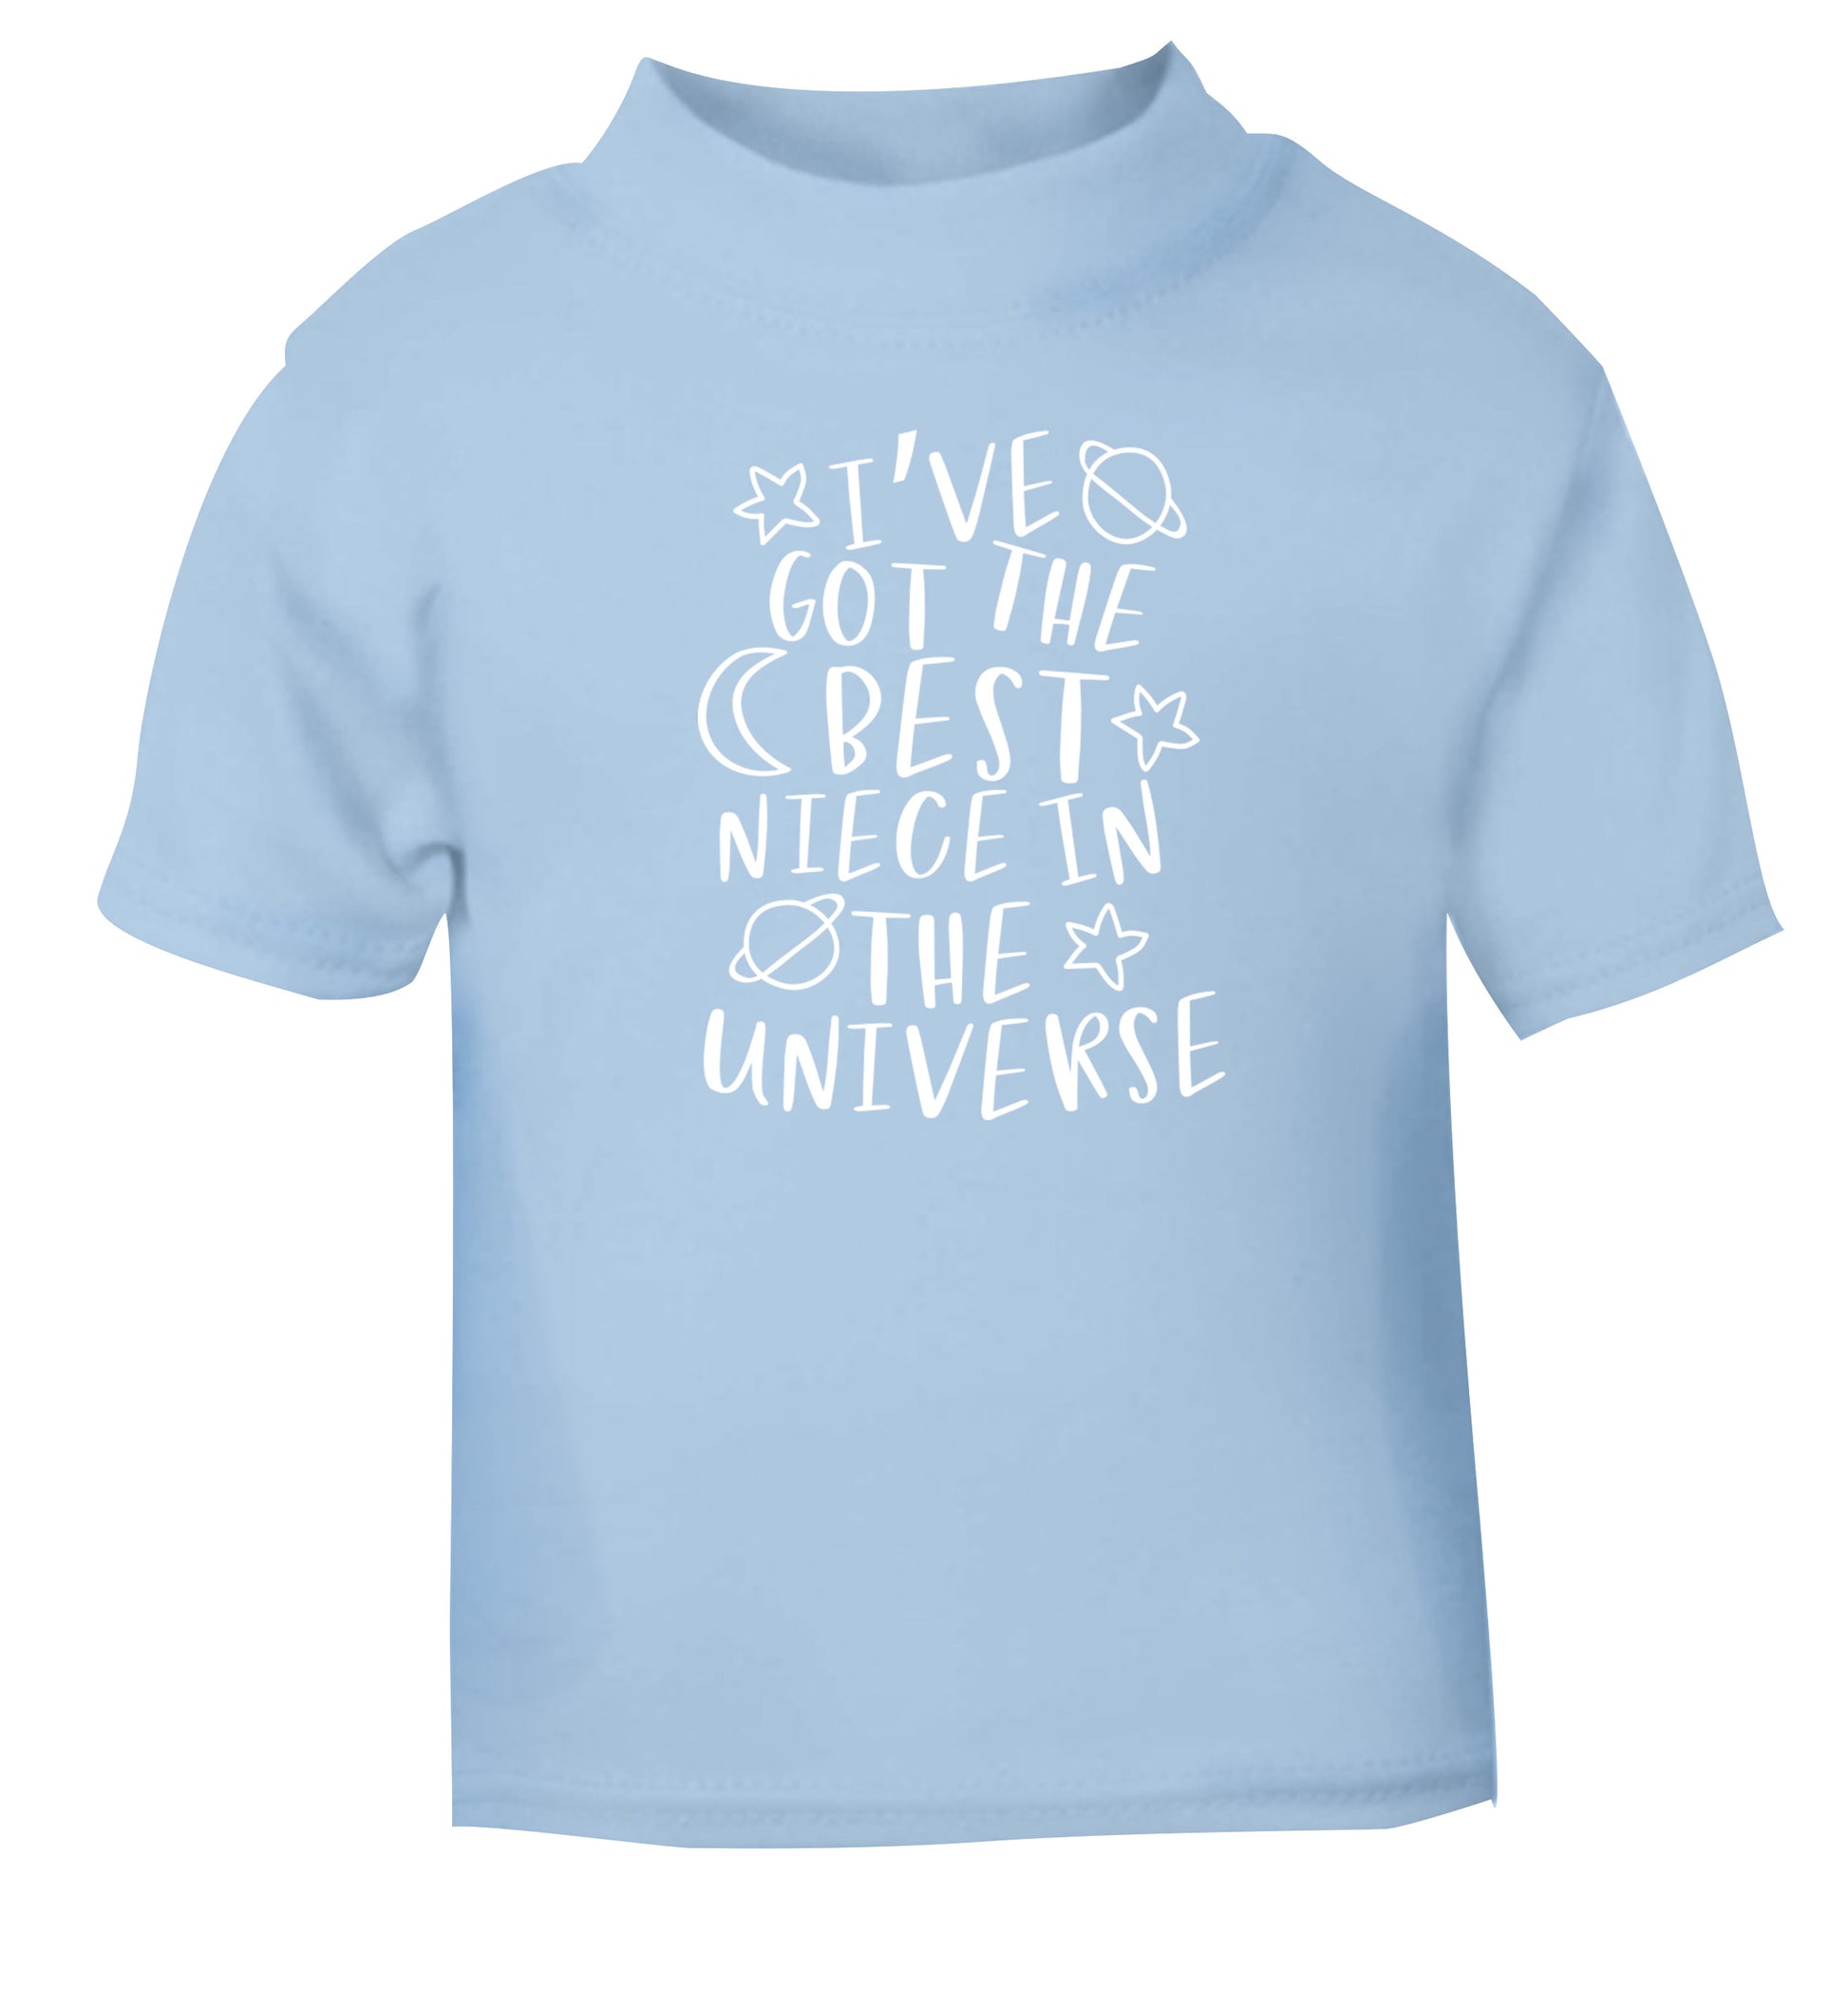 I've got the best niece in the universe light blue Baby Toddler Tshirt 2 Years